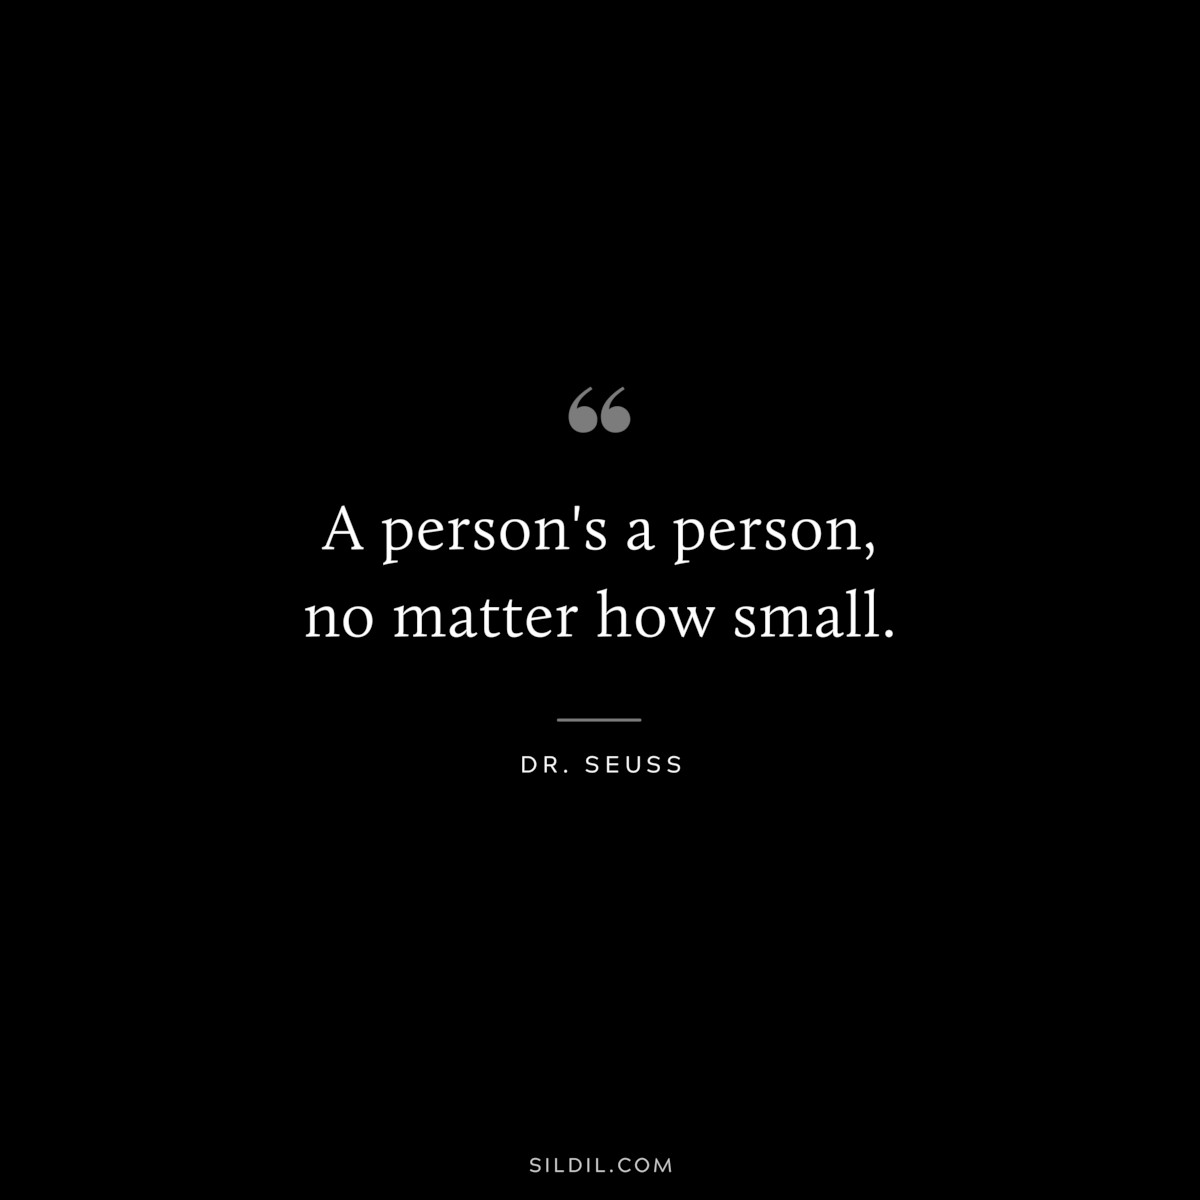 A person's a person, no matter how small. ― Dr. Seuss